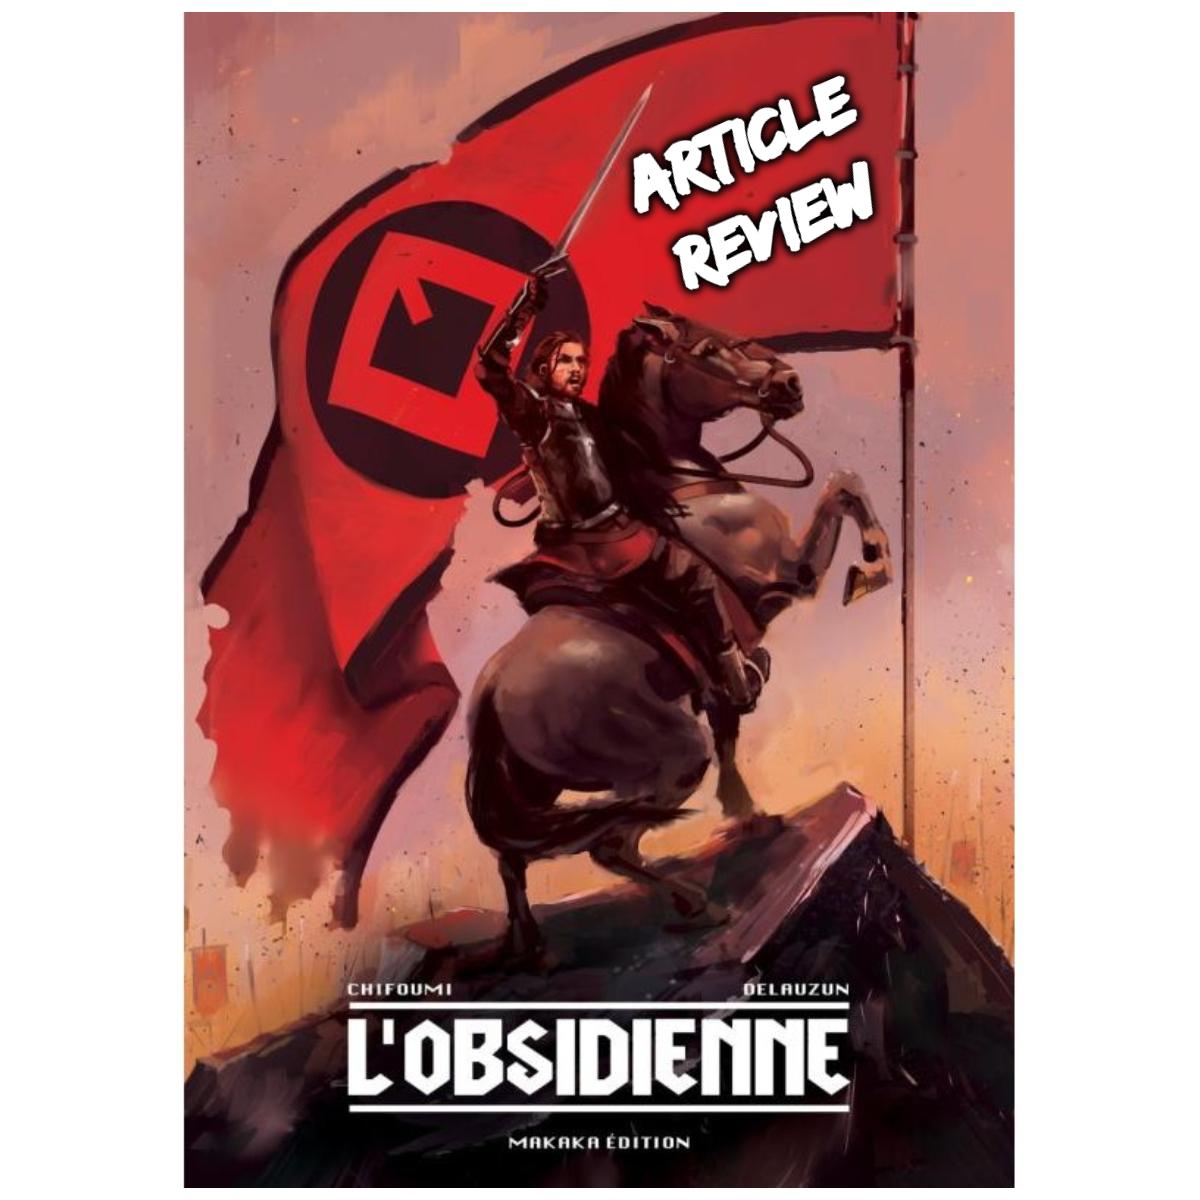 L'Obsidienne article, review